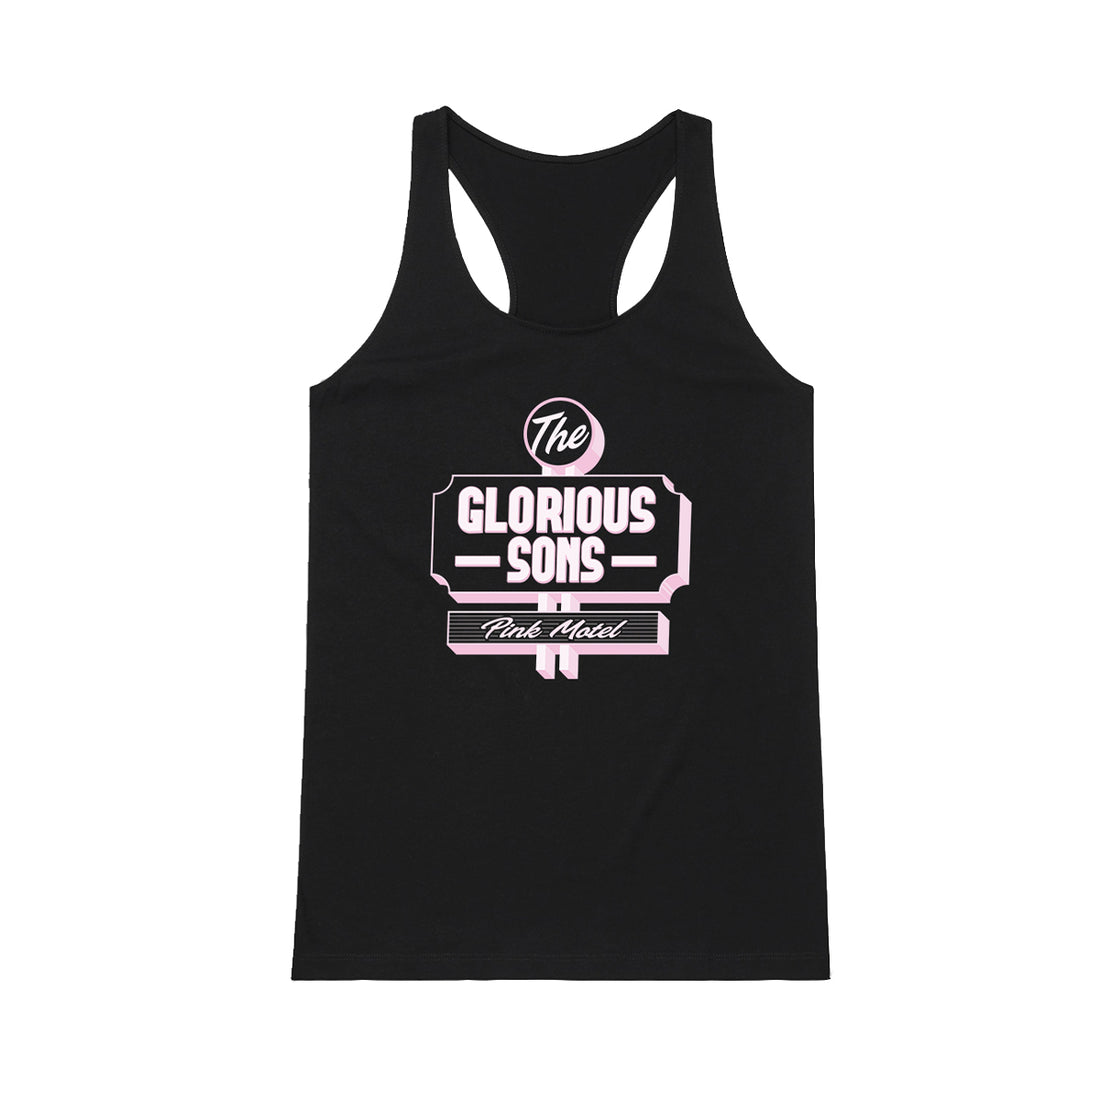 The Glorious Sons - Pink Motel - Women's Racerback Tank Top